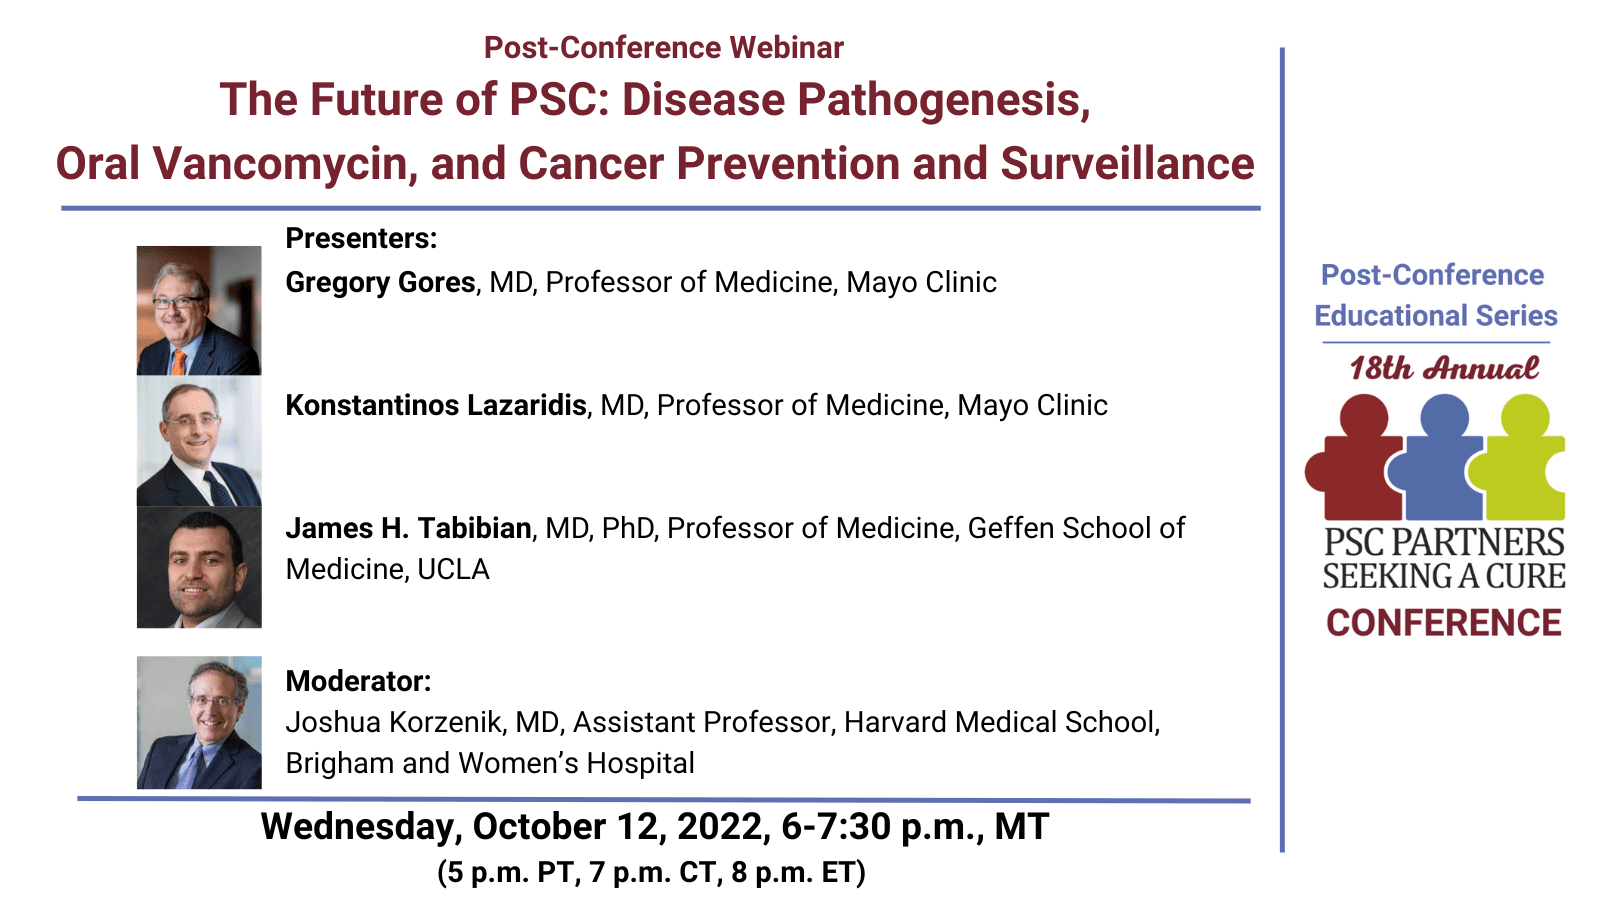 Post-Conference Webinar: Disease Pathogenesis, Oral Vancomycin, and Cancer Prevention and Surveillance